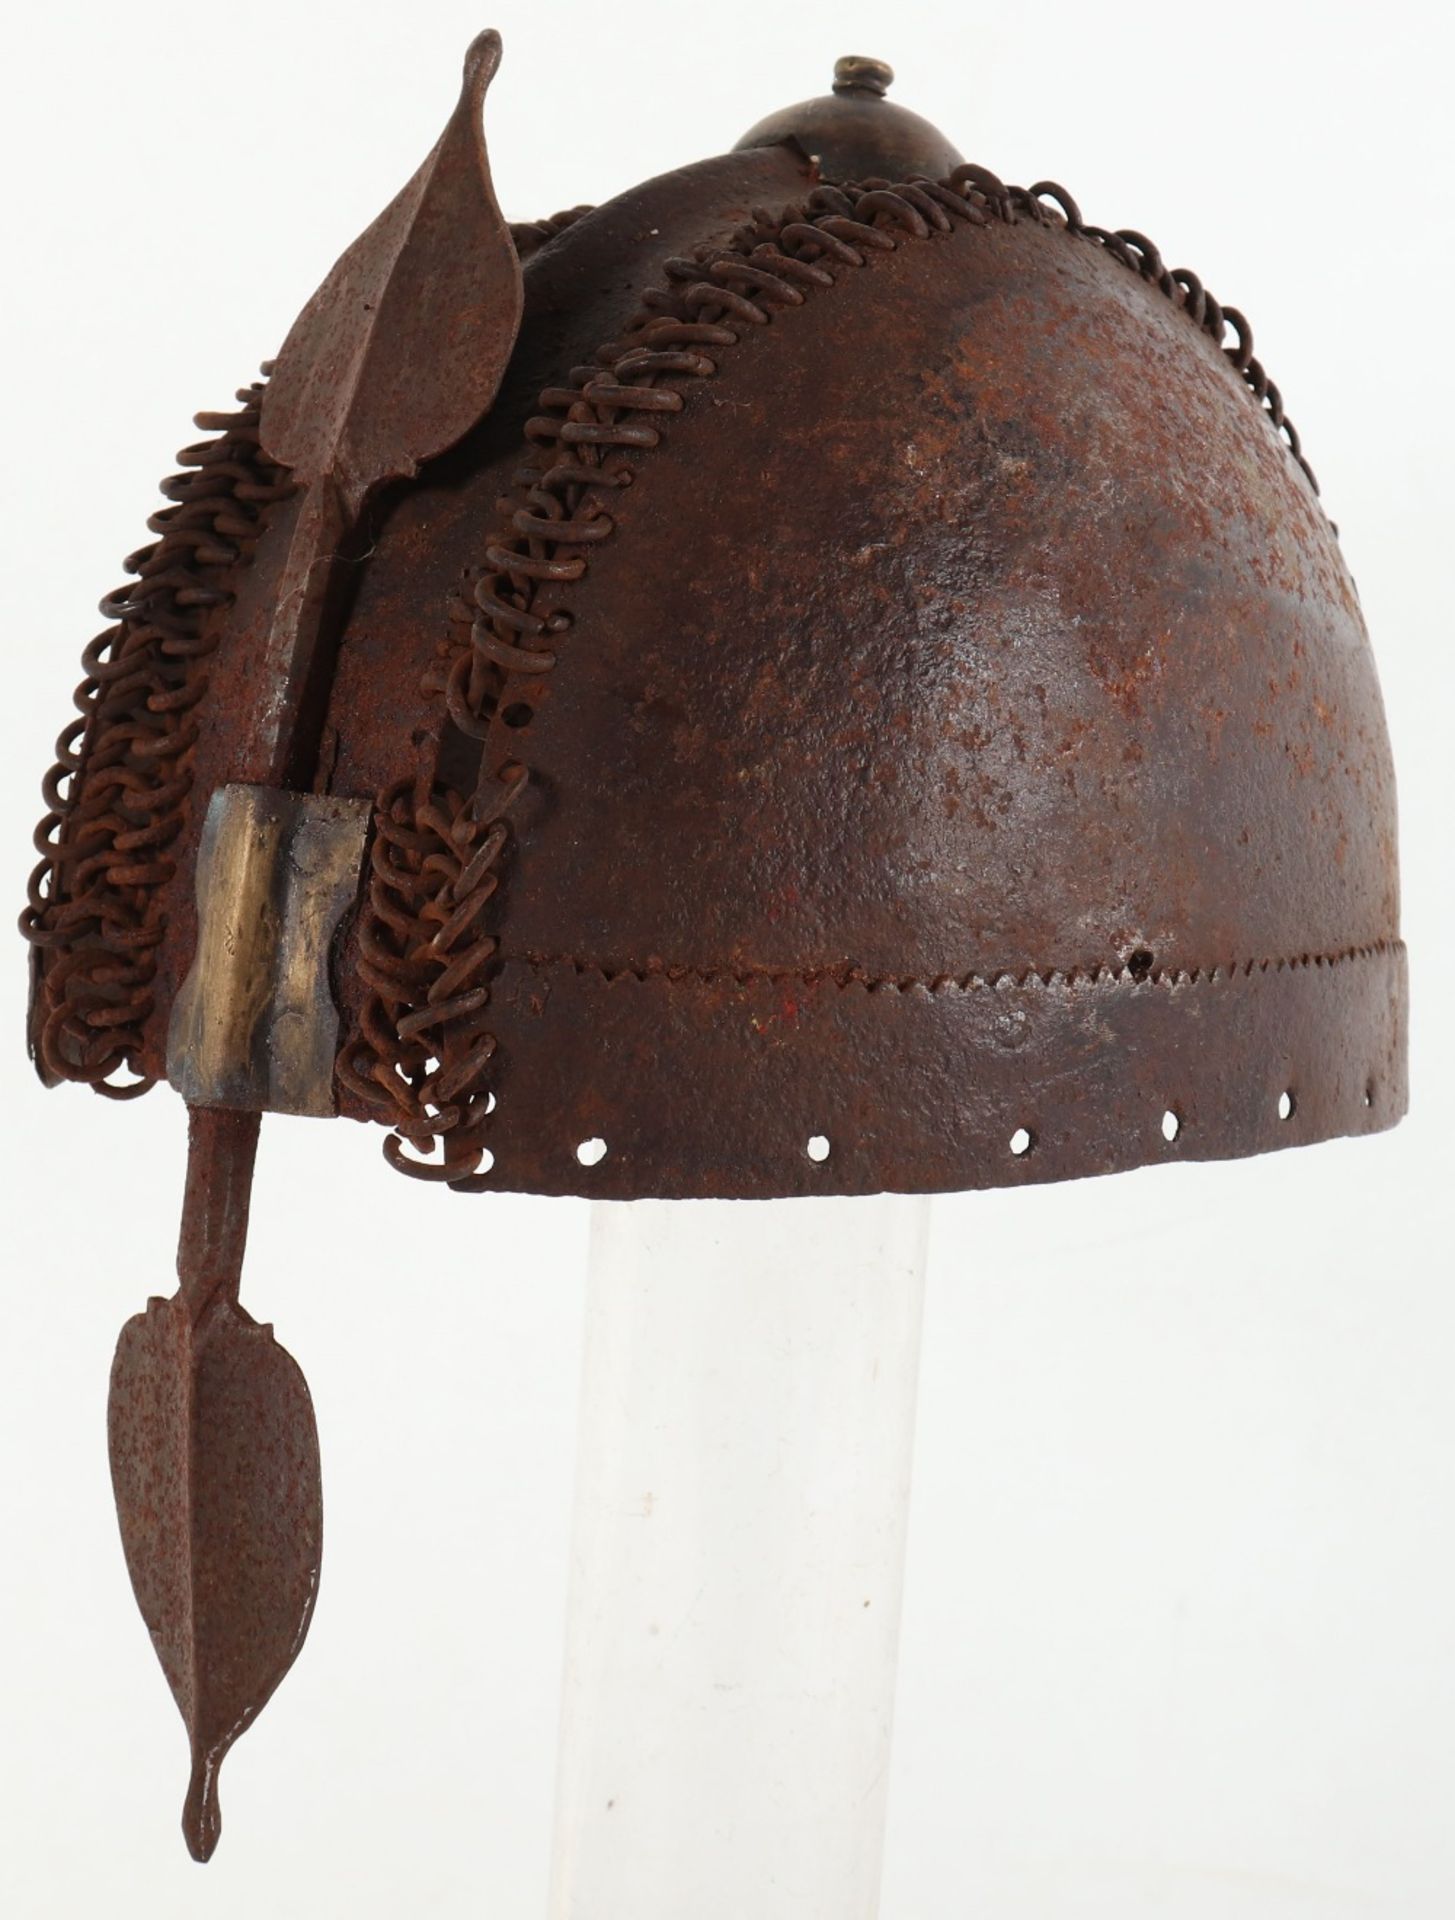 Indian Mail and Plate Helmet, 17th Century - Image 5 of 10